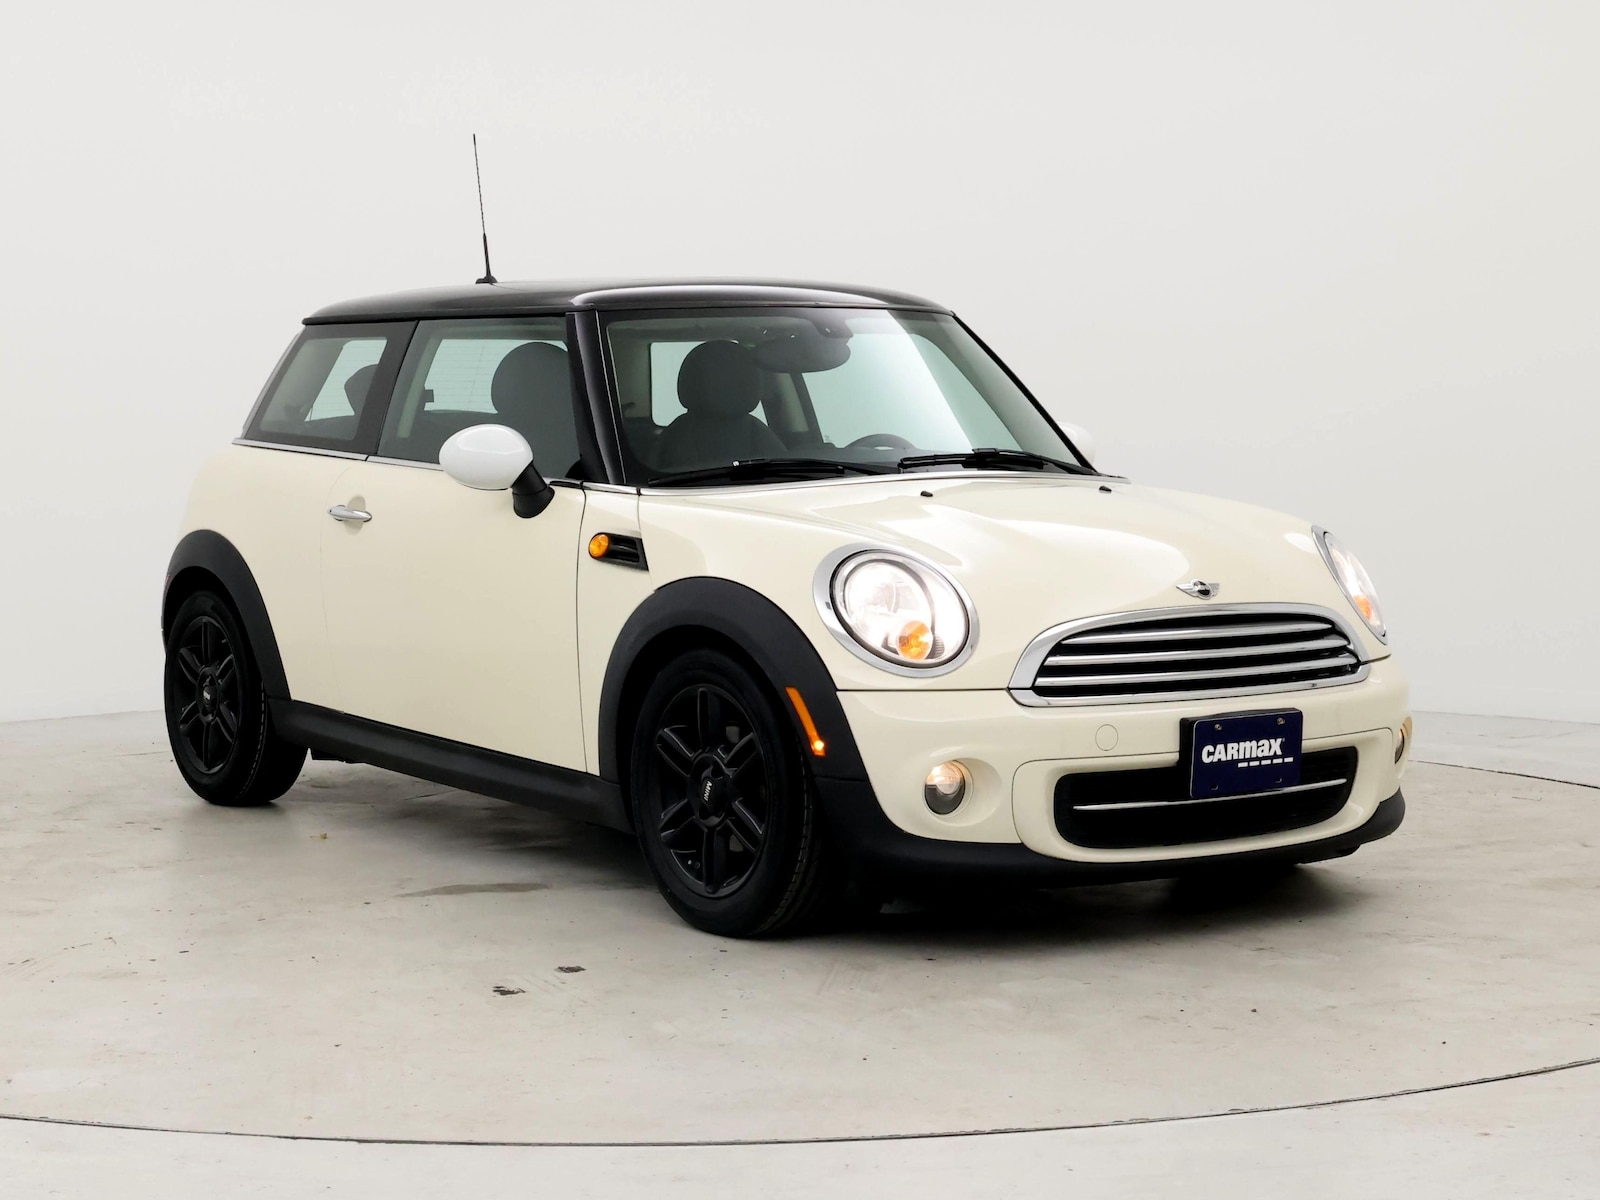 Used 2013 MINI Cooper Base with VIN WMWSU3C58DT688322 for sale in Kenosha, WI